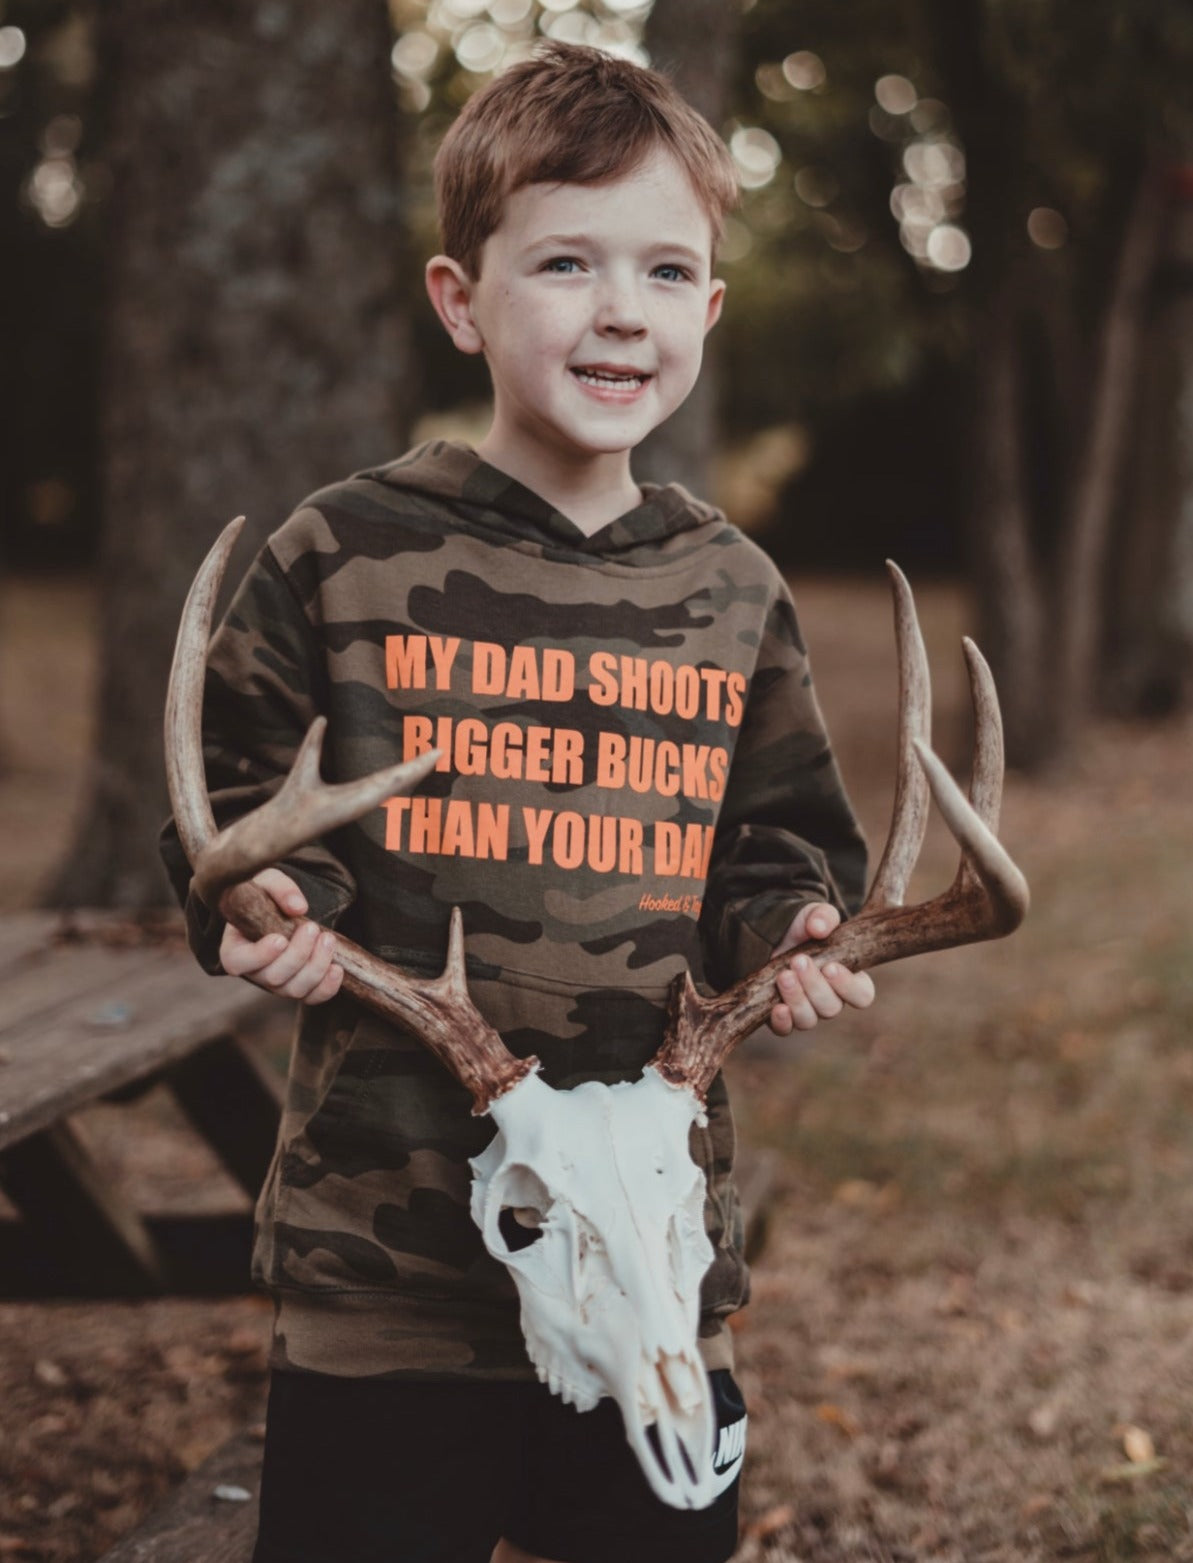 Youth "My Dad Shoots Bigger Bucks Than Your Dad" Hoodie